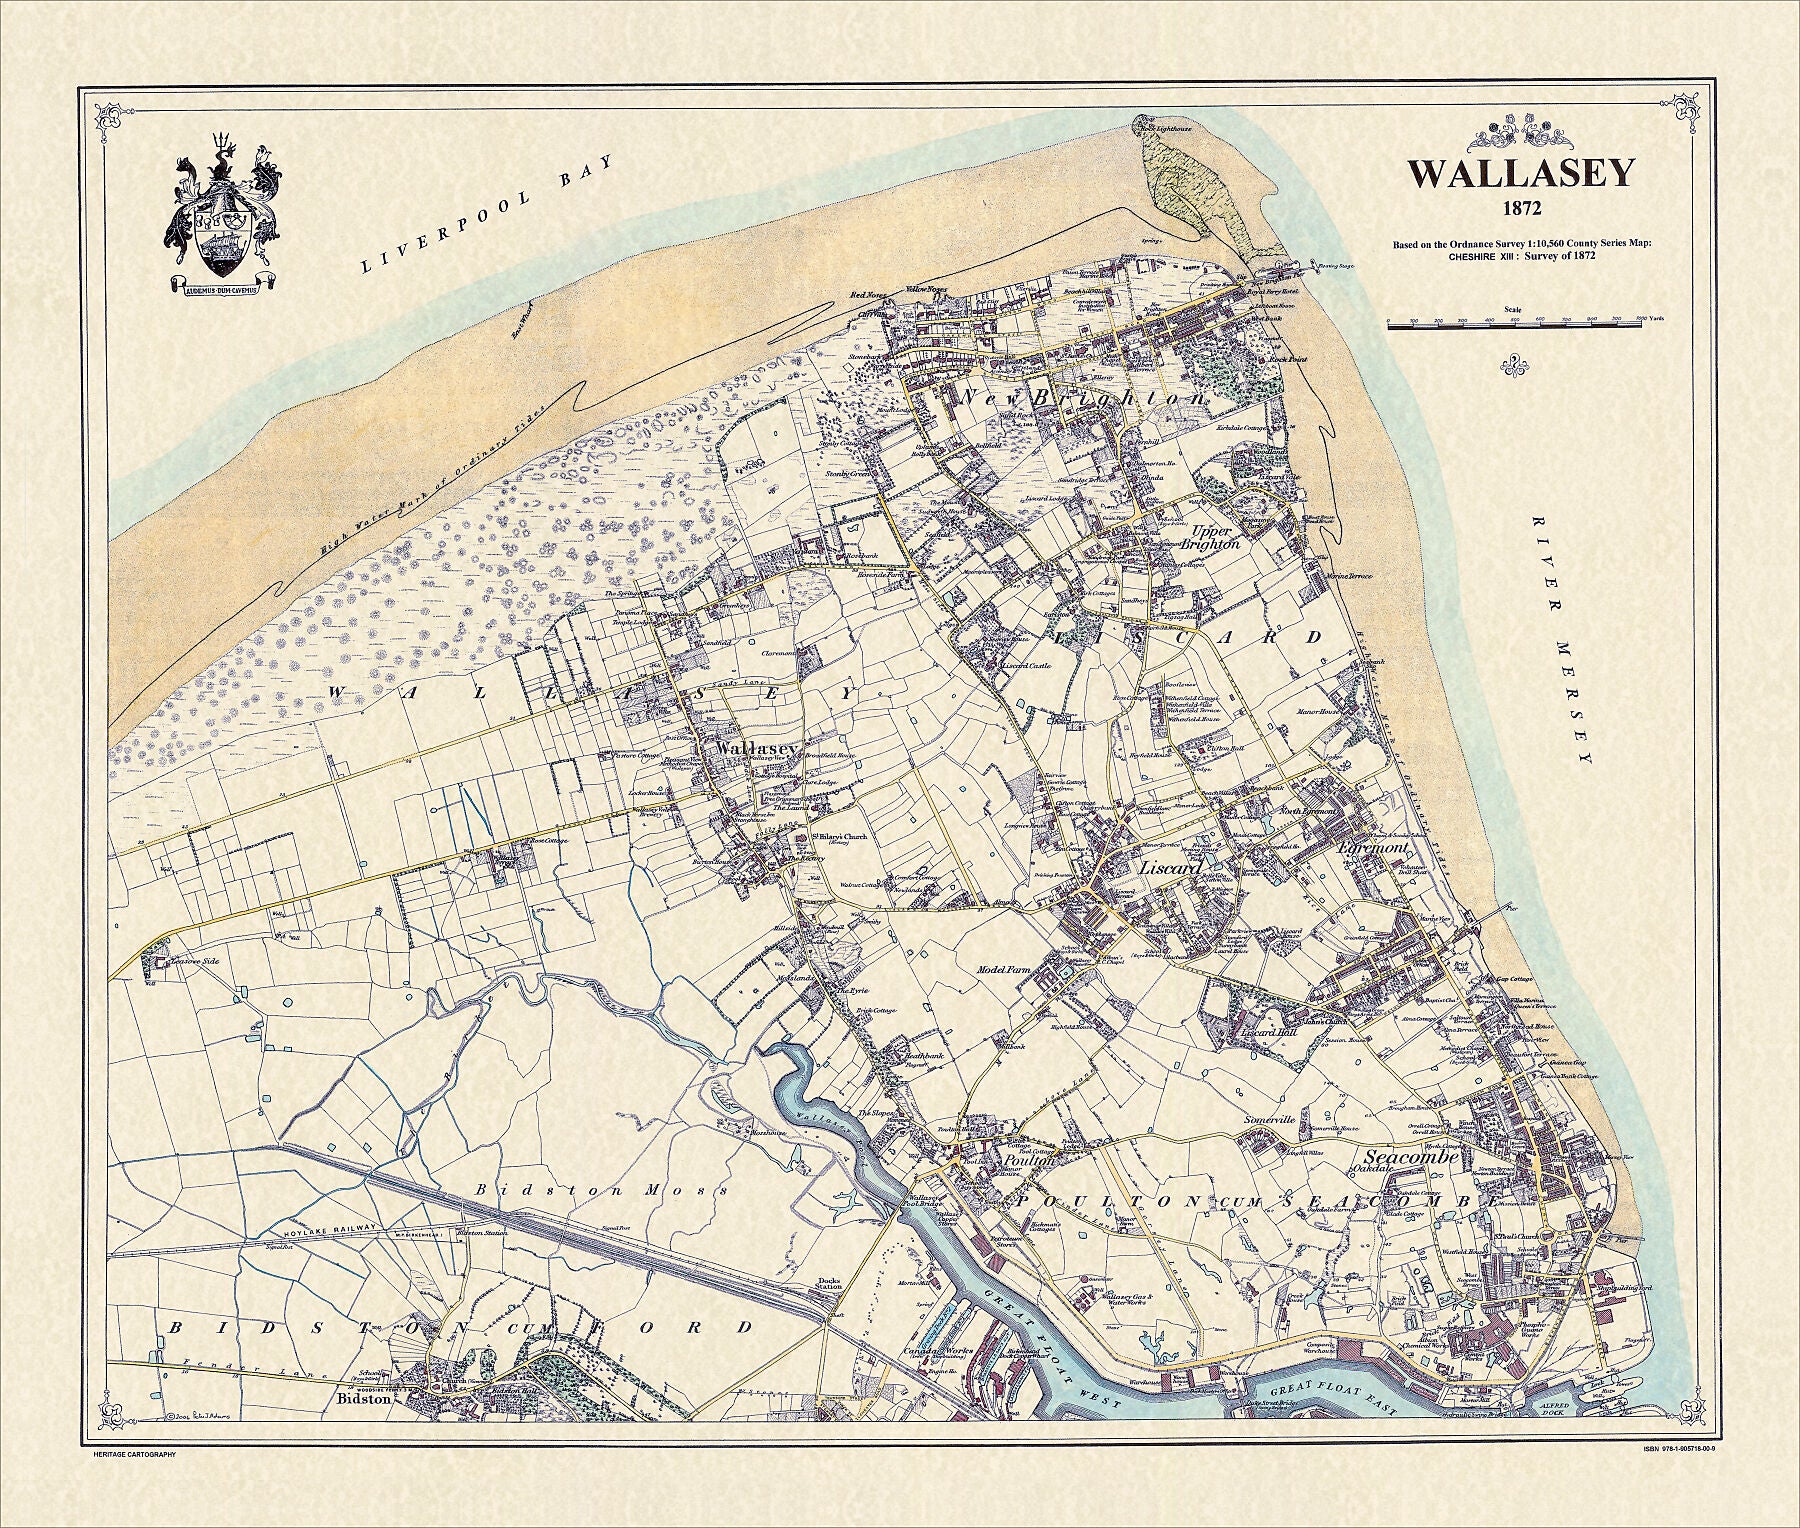 Coloured Victorian map of Wallasey in 1872 by Peter J Adams of Heritage Cartography